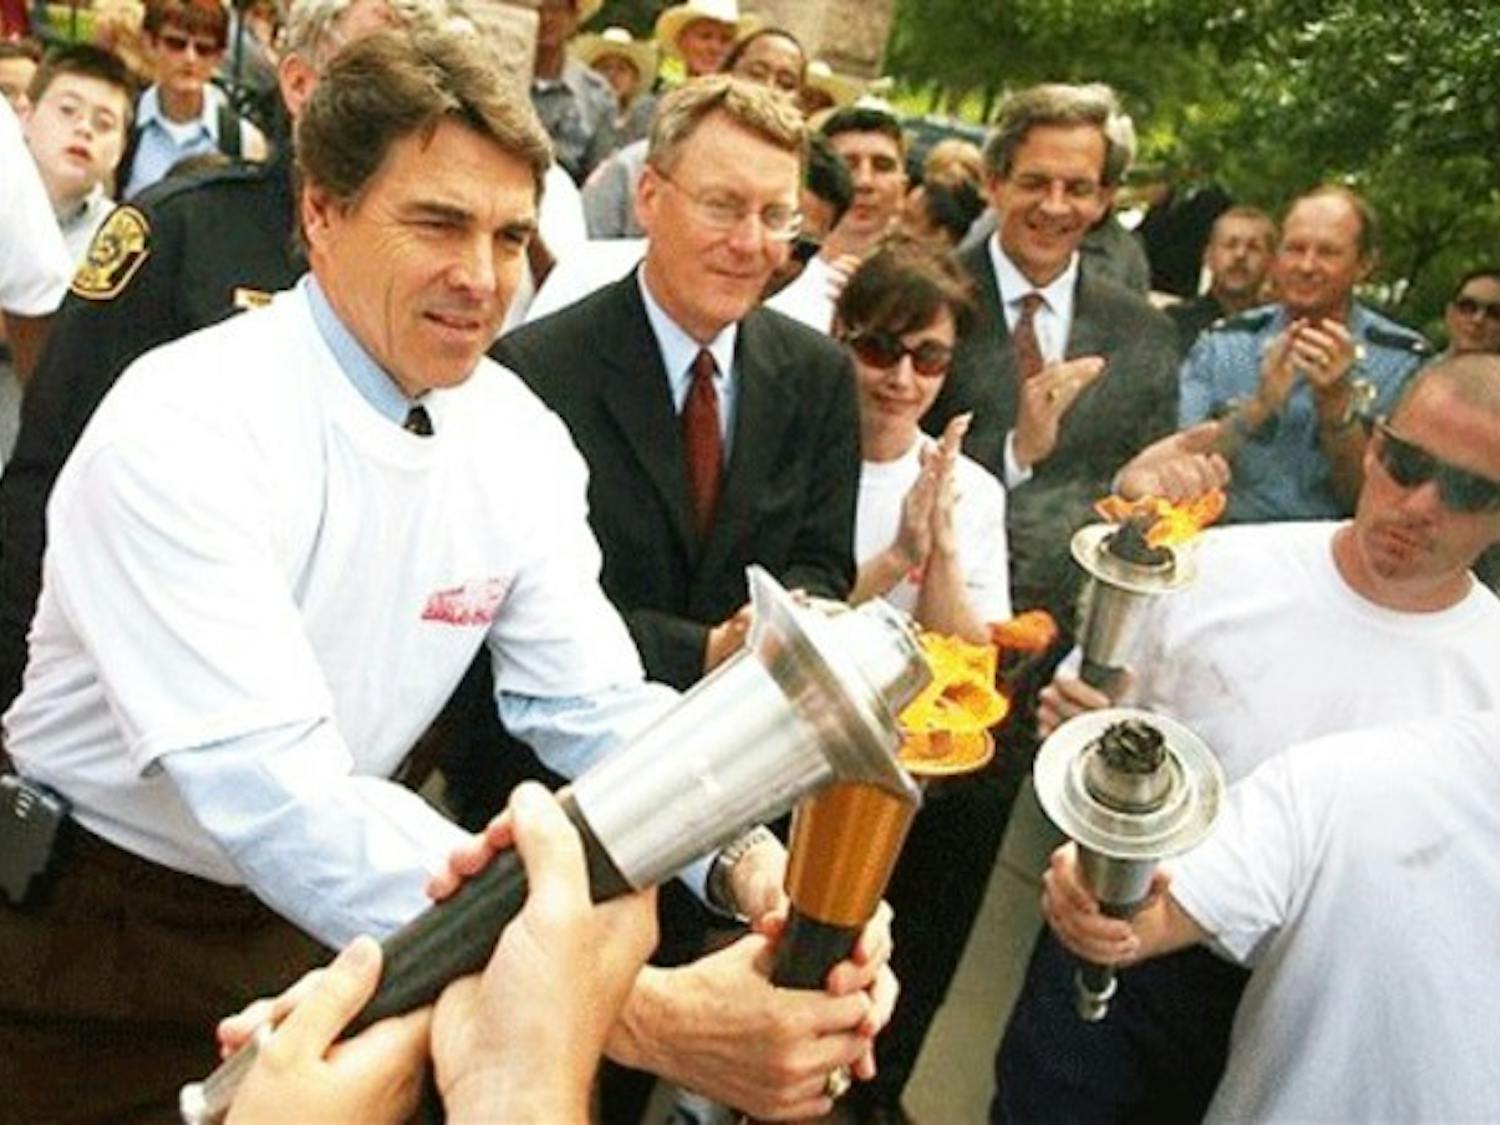 Texas Gov. Rick Perry lights a torch outside the Capitol on Monday to kick off the 2006 Special Olympics, a nationwide event coming to the Upper Valley.